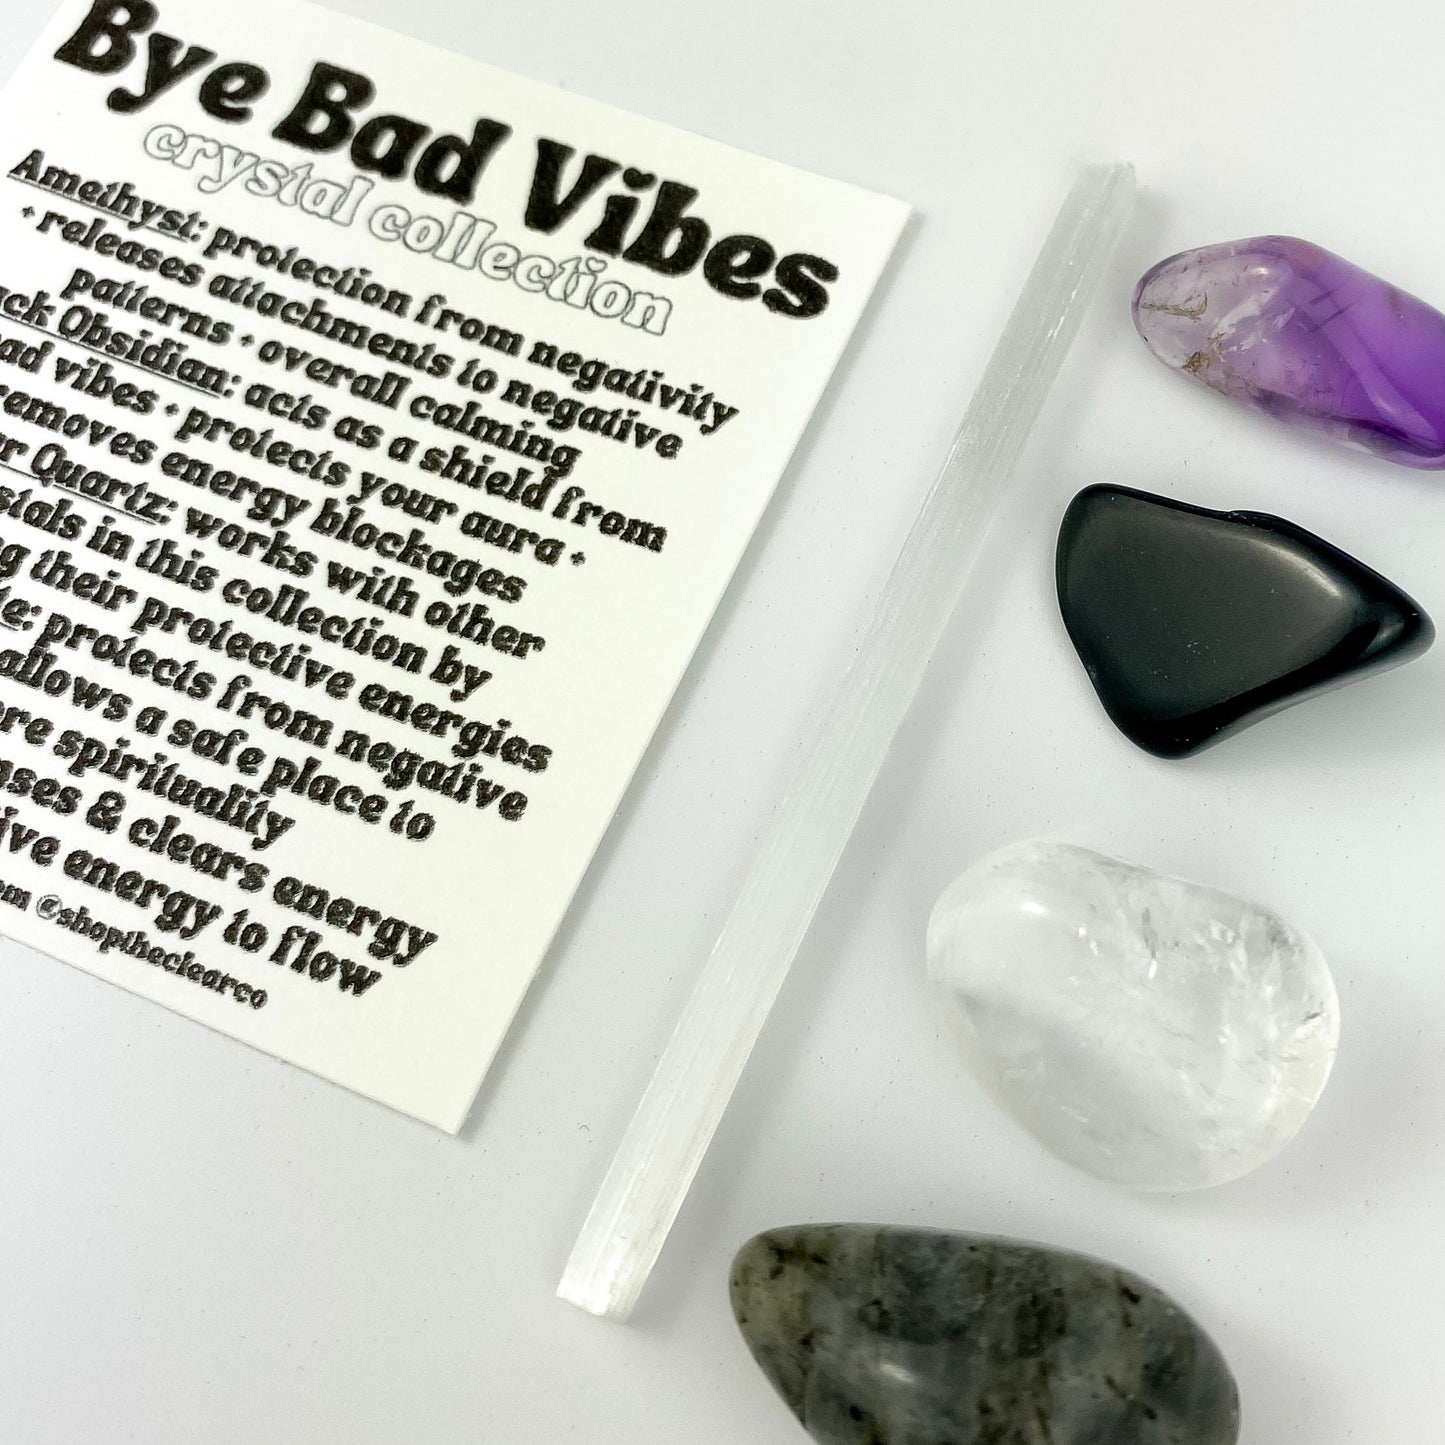 Bye Bad Vibes - Crystal Collection